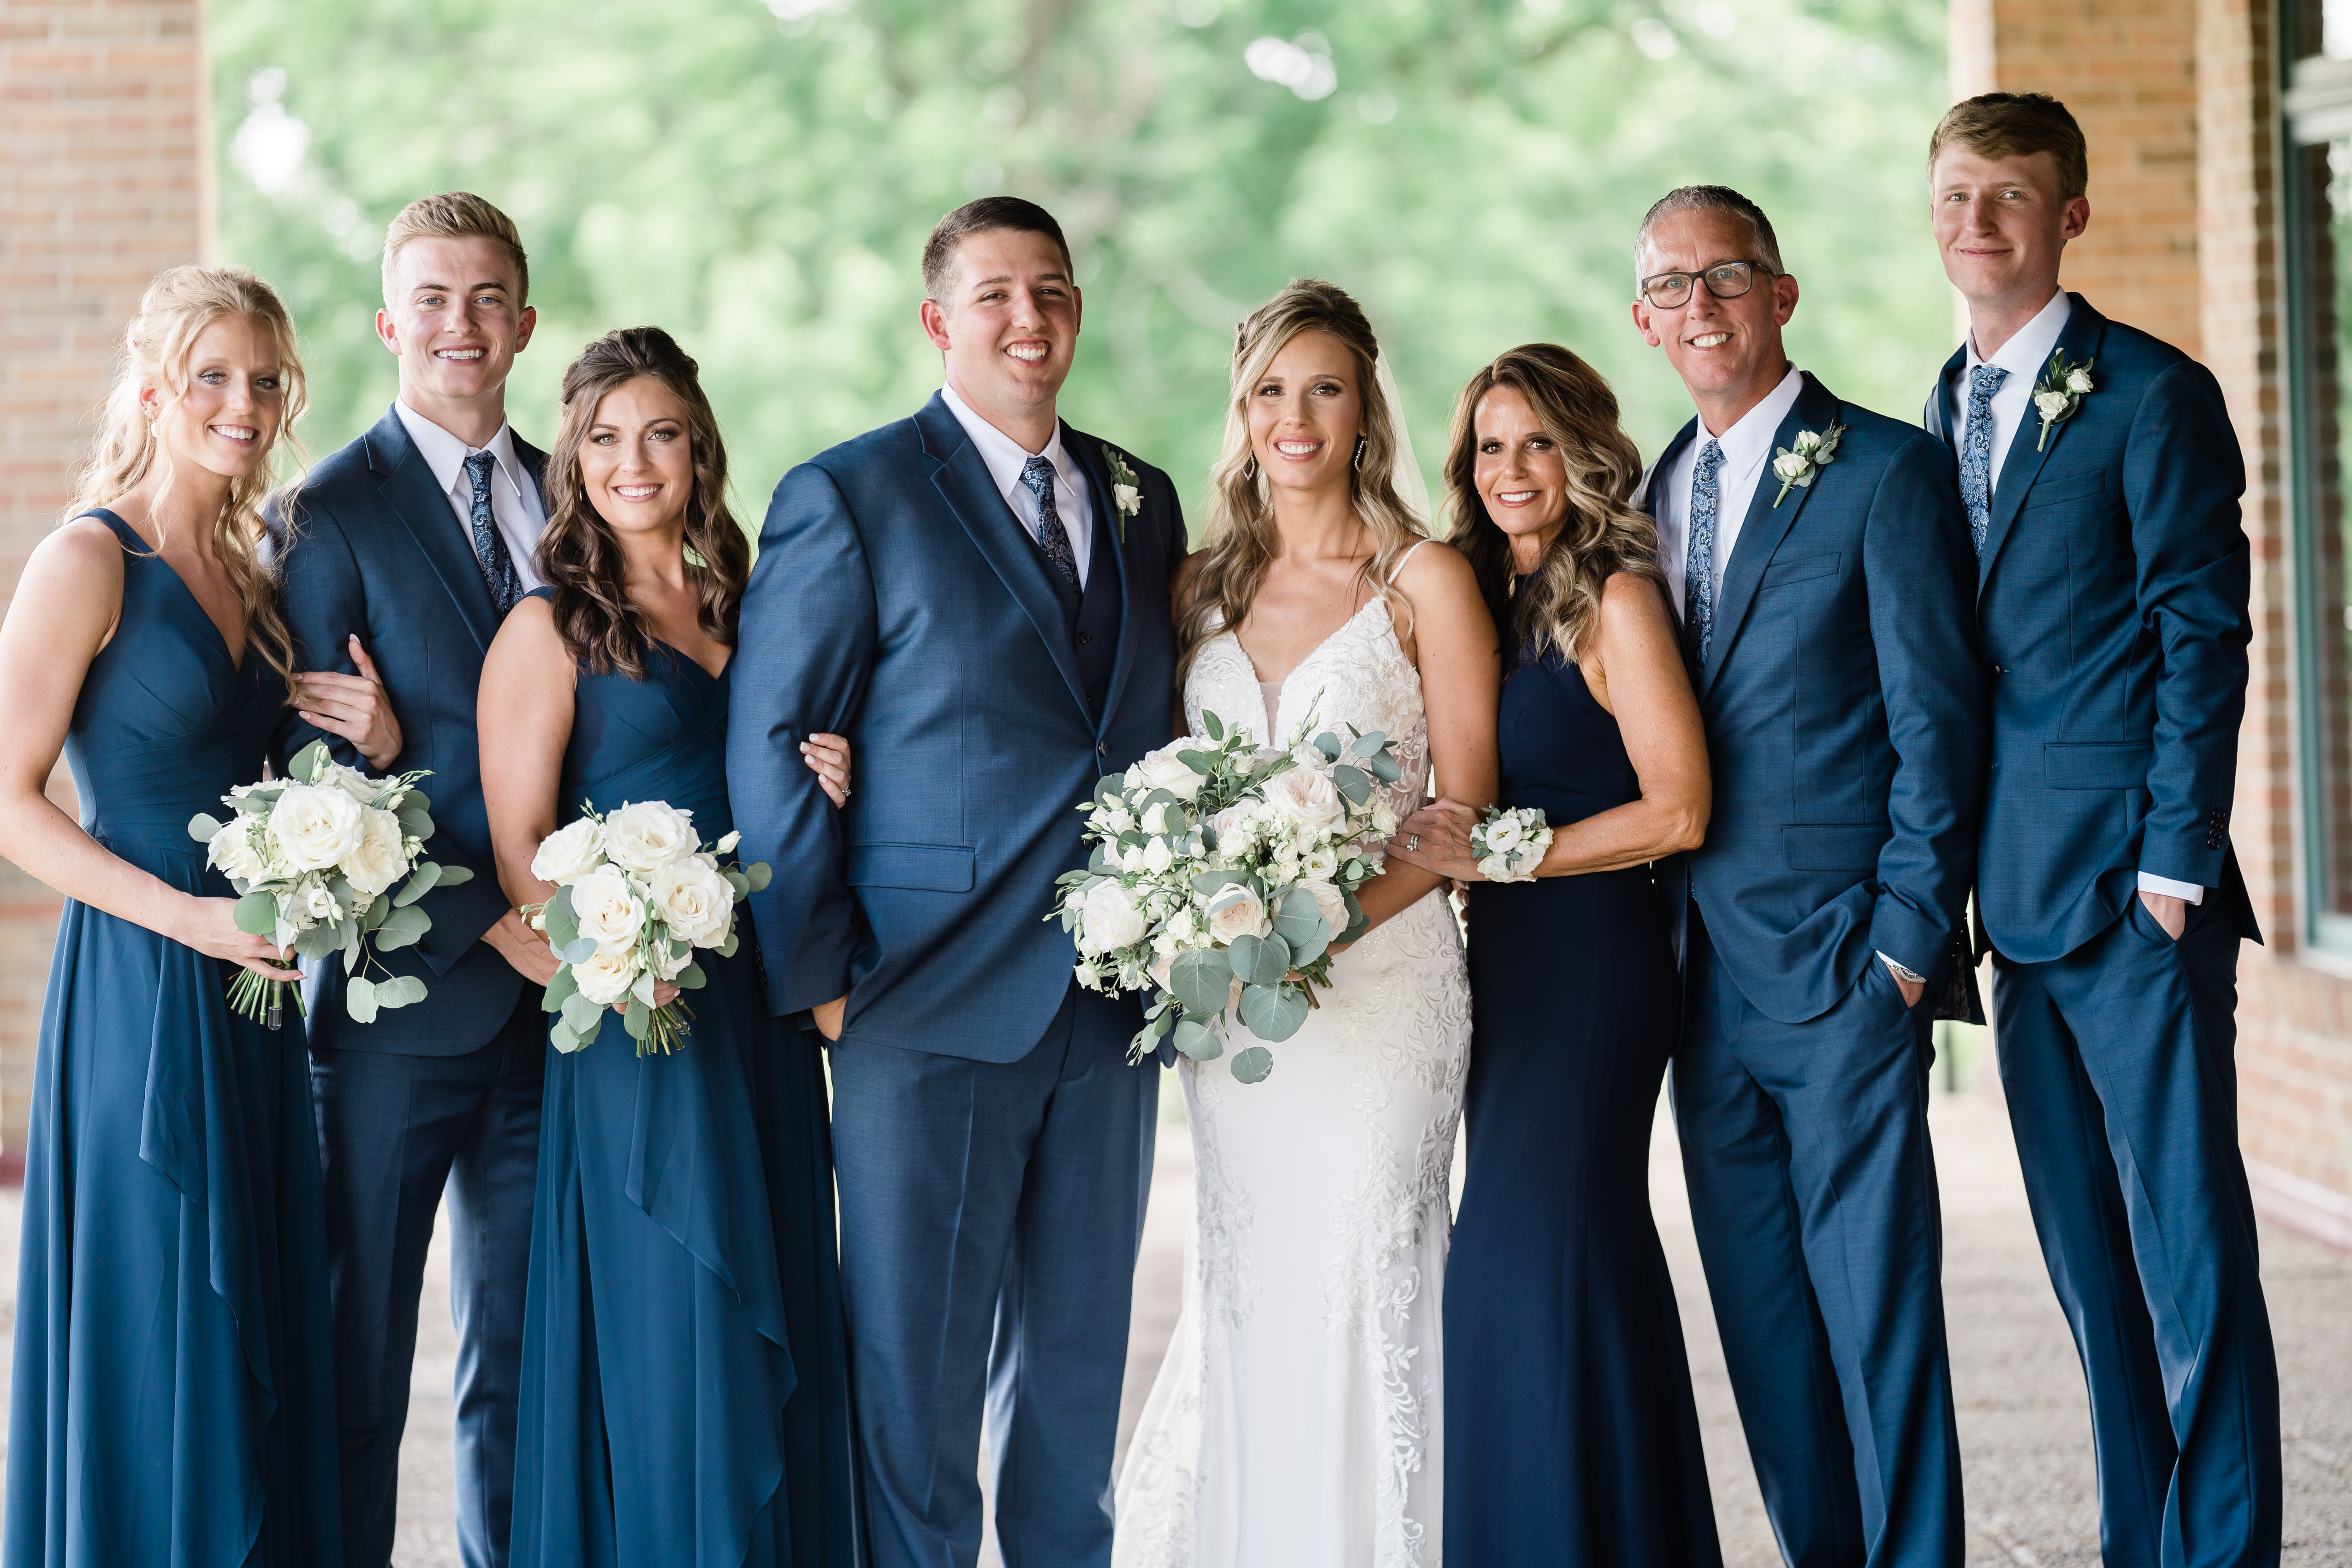 Fort wayne wedding photographers capture bride and groom standing with family after ceremony